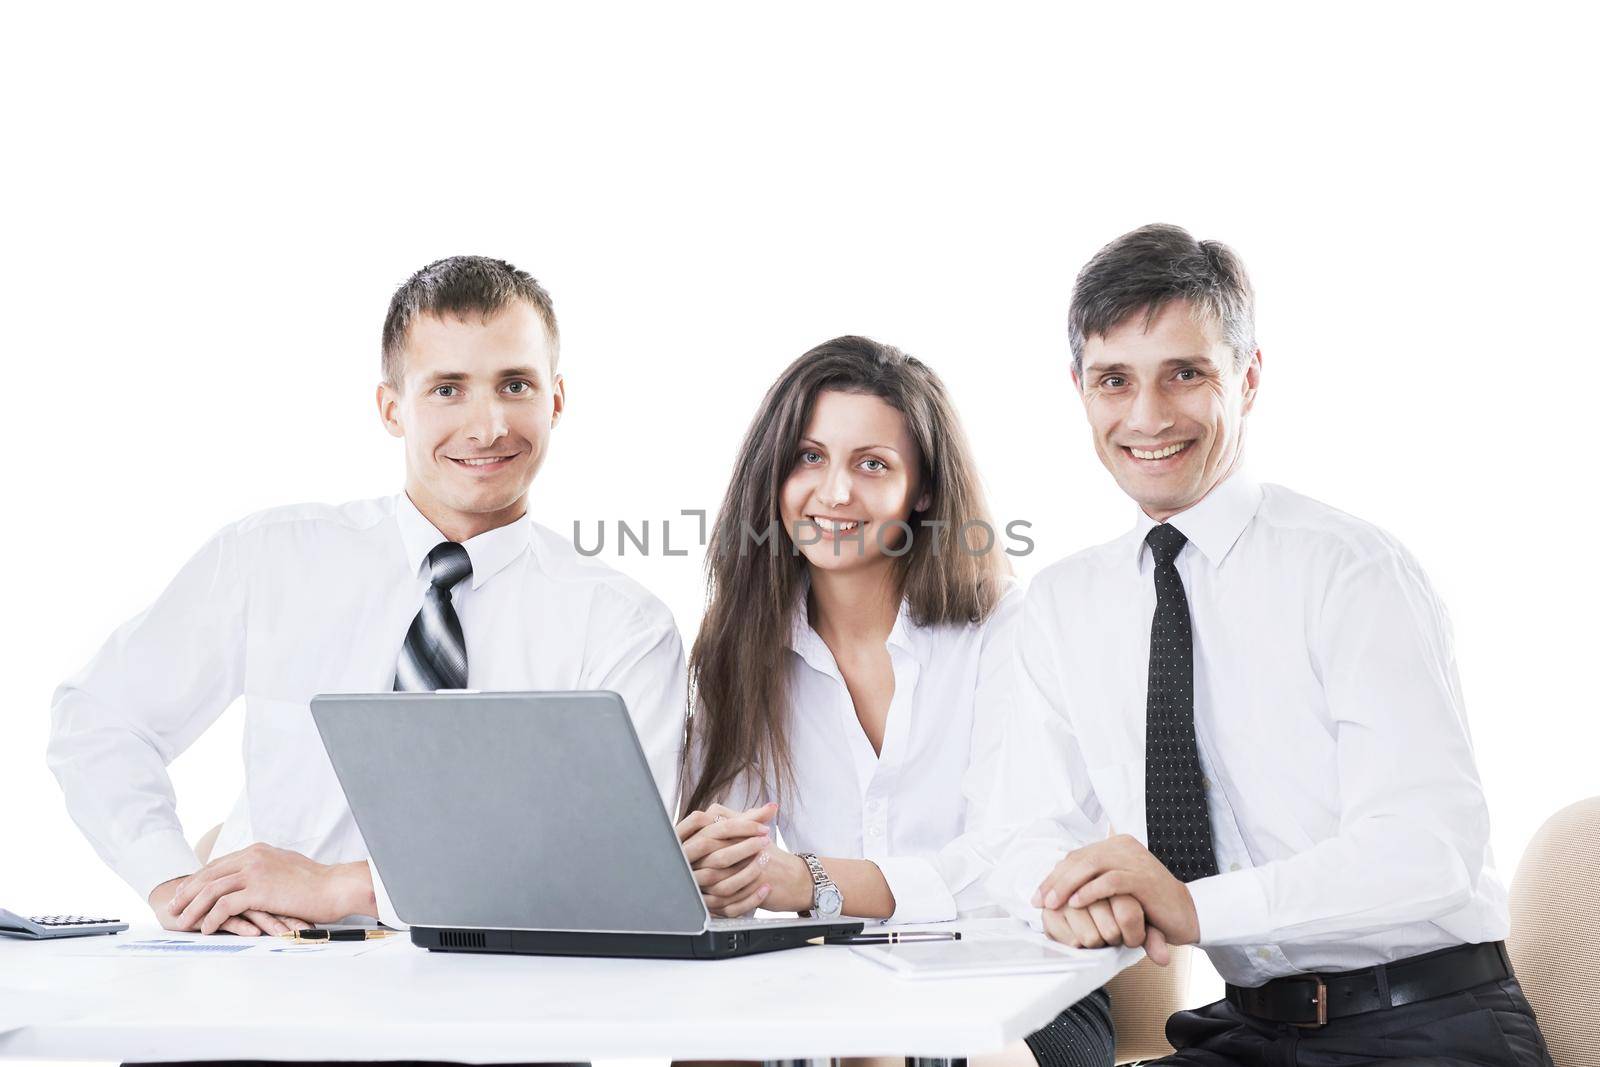 Group of business people working. Isolated on white background. Smiling and looking into the camera